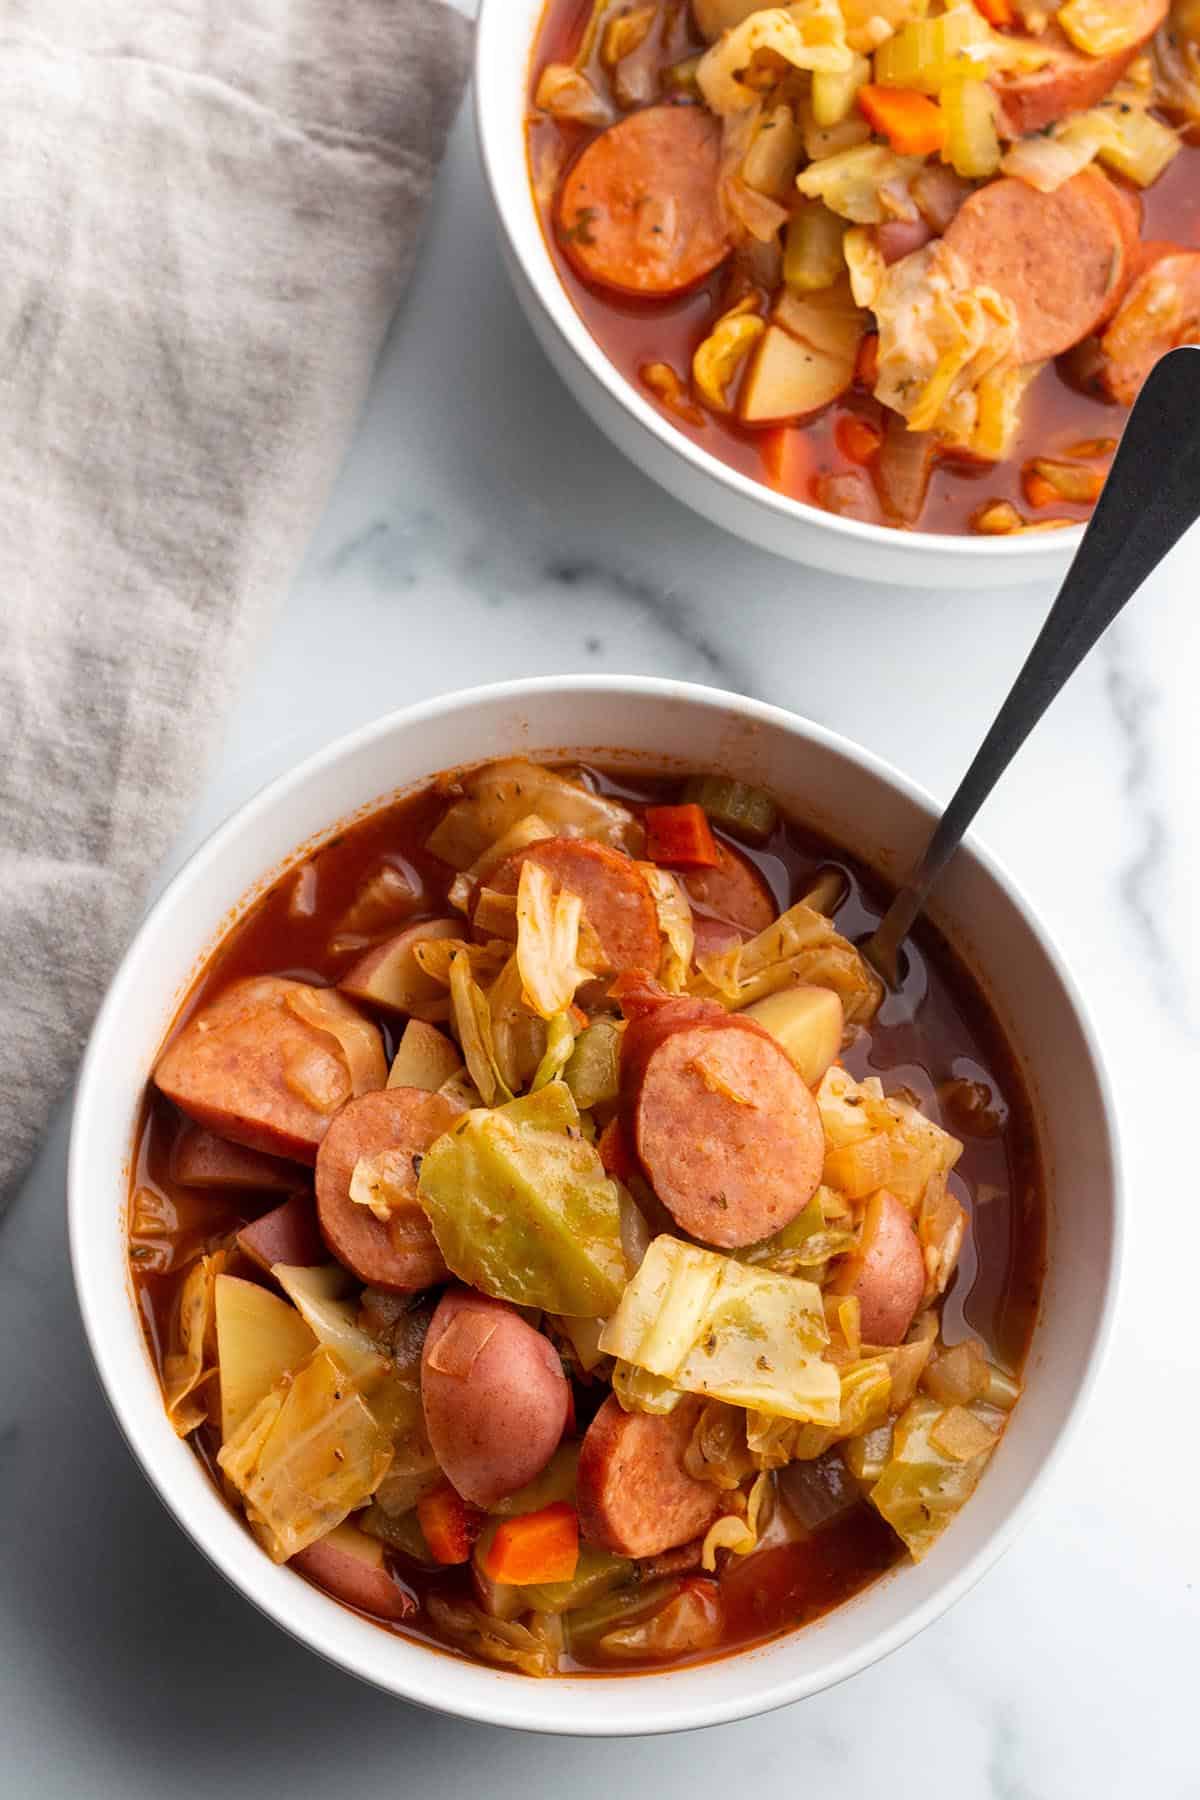 A white bowl full of soup made with sausage links, cabbage leaves and red potatoes with a spoon sticking out.